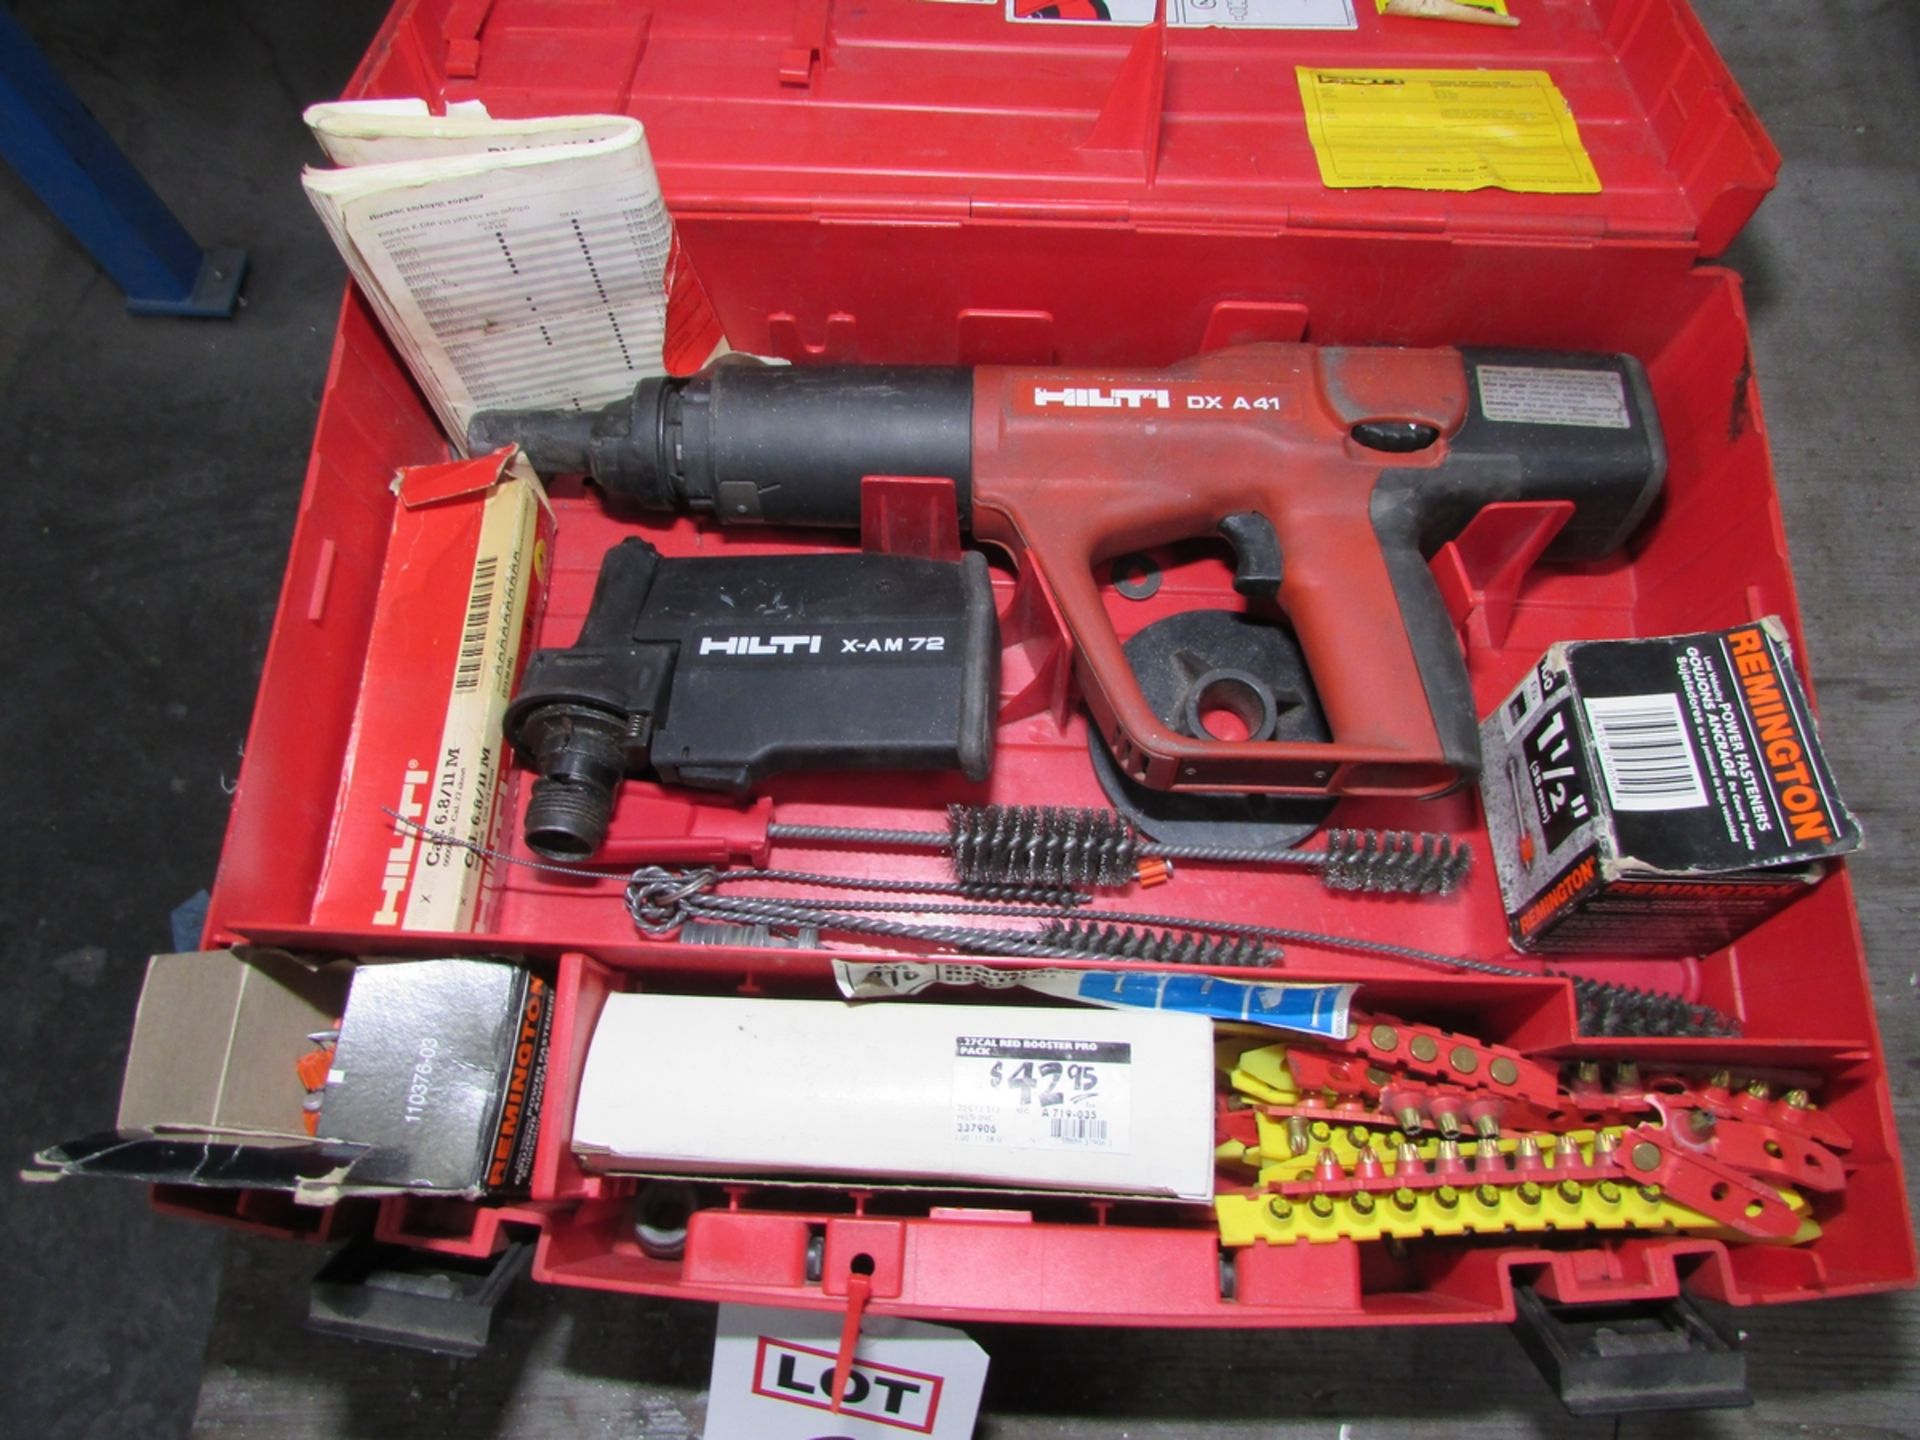 HILTI POWDER ACTUATED FASTENING TOOL, MODEL DX A41, W/ HILTI X-AM72 MAGAZINE ATTACHMENT - Image 2 of 3